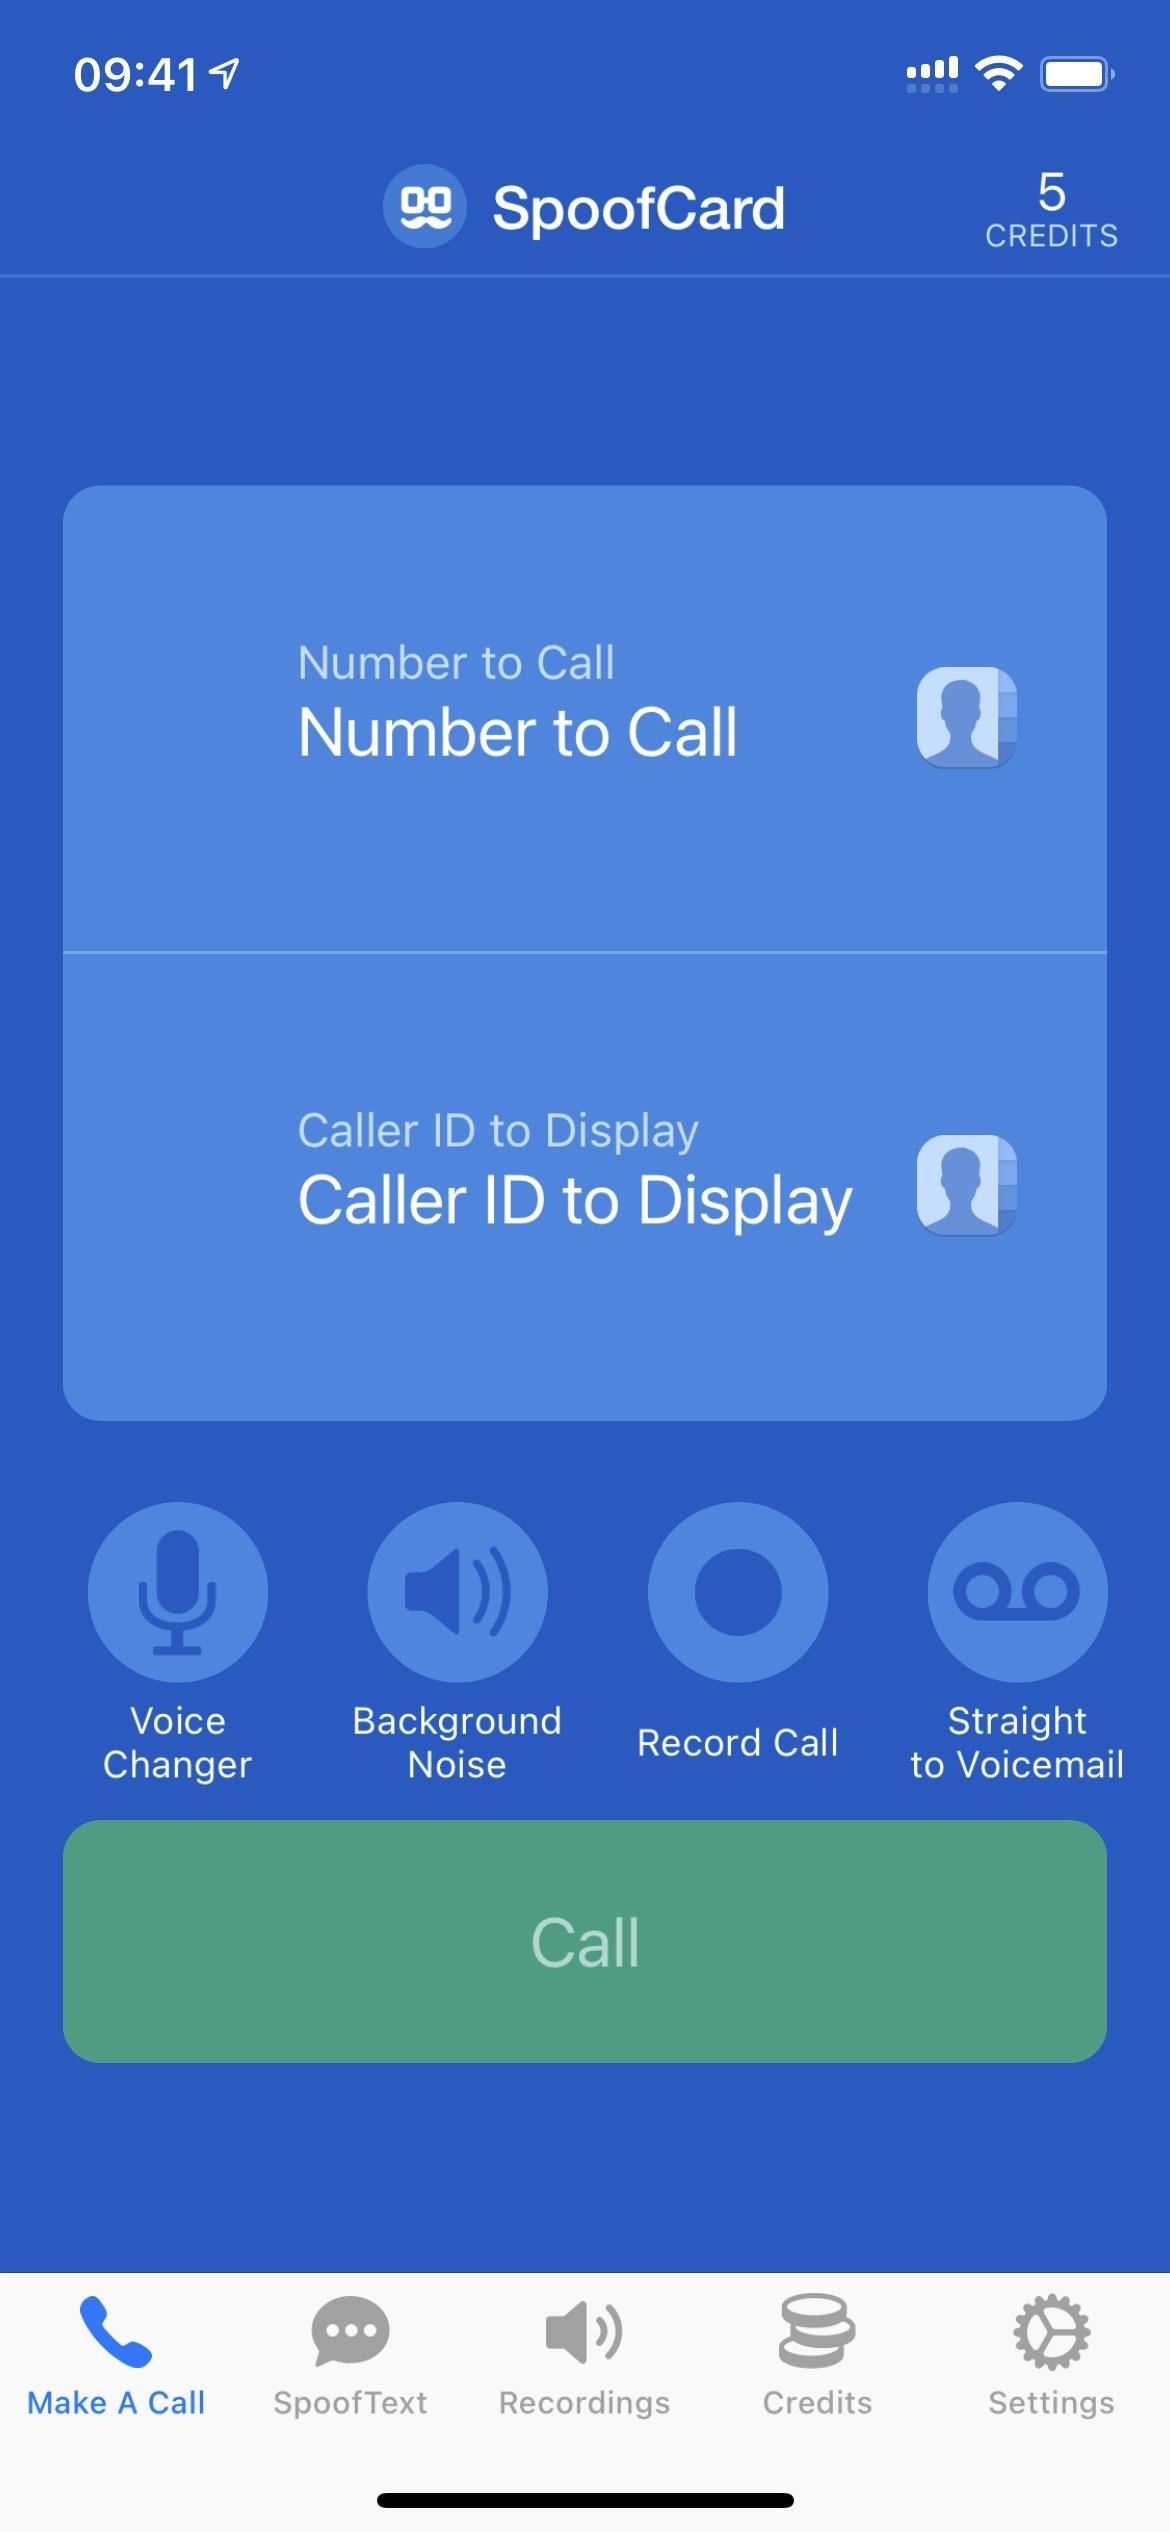 Make Spoofed Calls Using Any Phone Number You Want Right from Your Smartphone